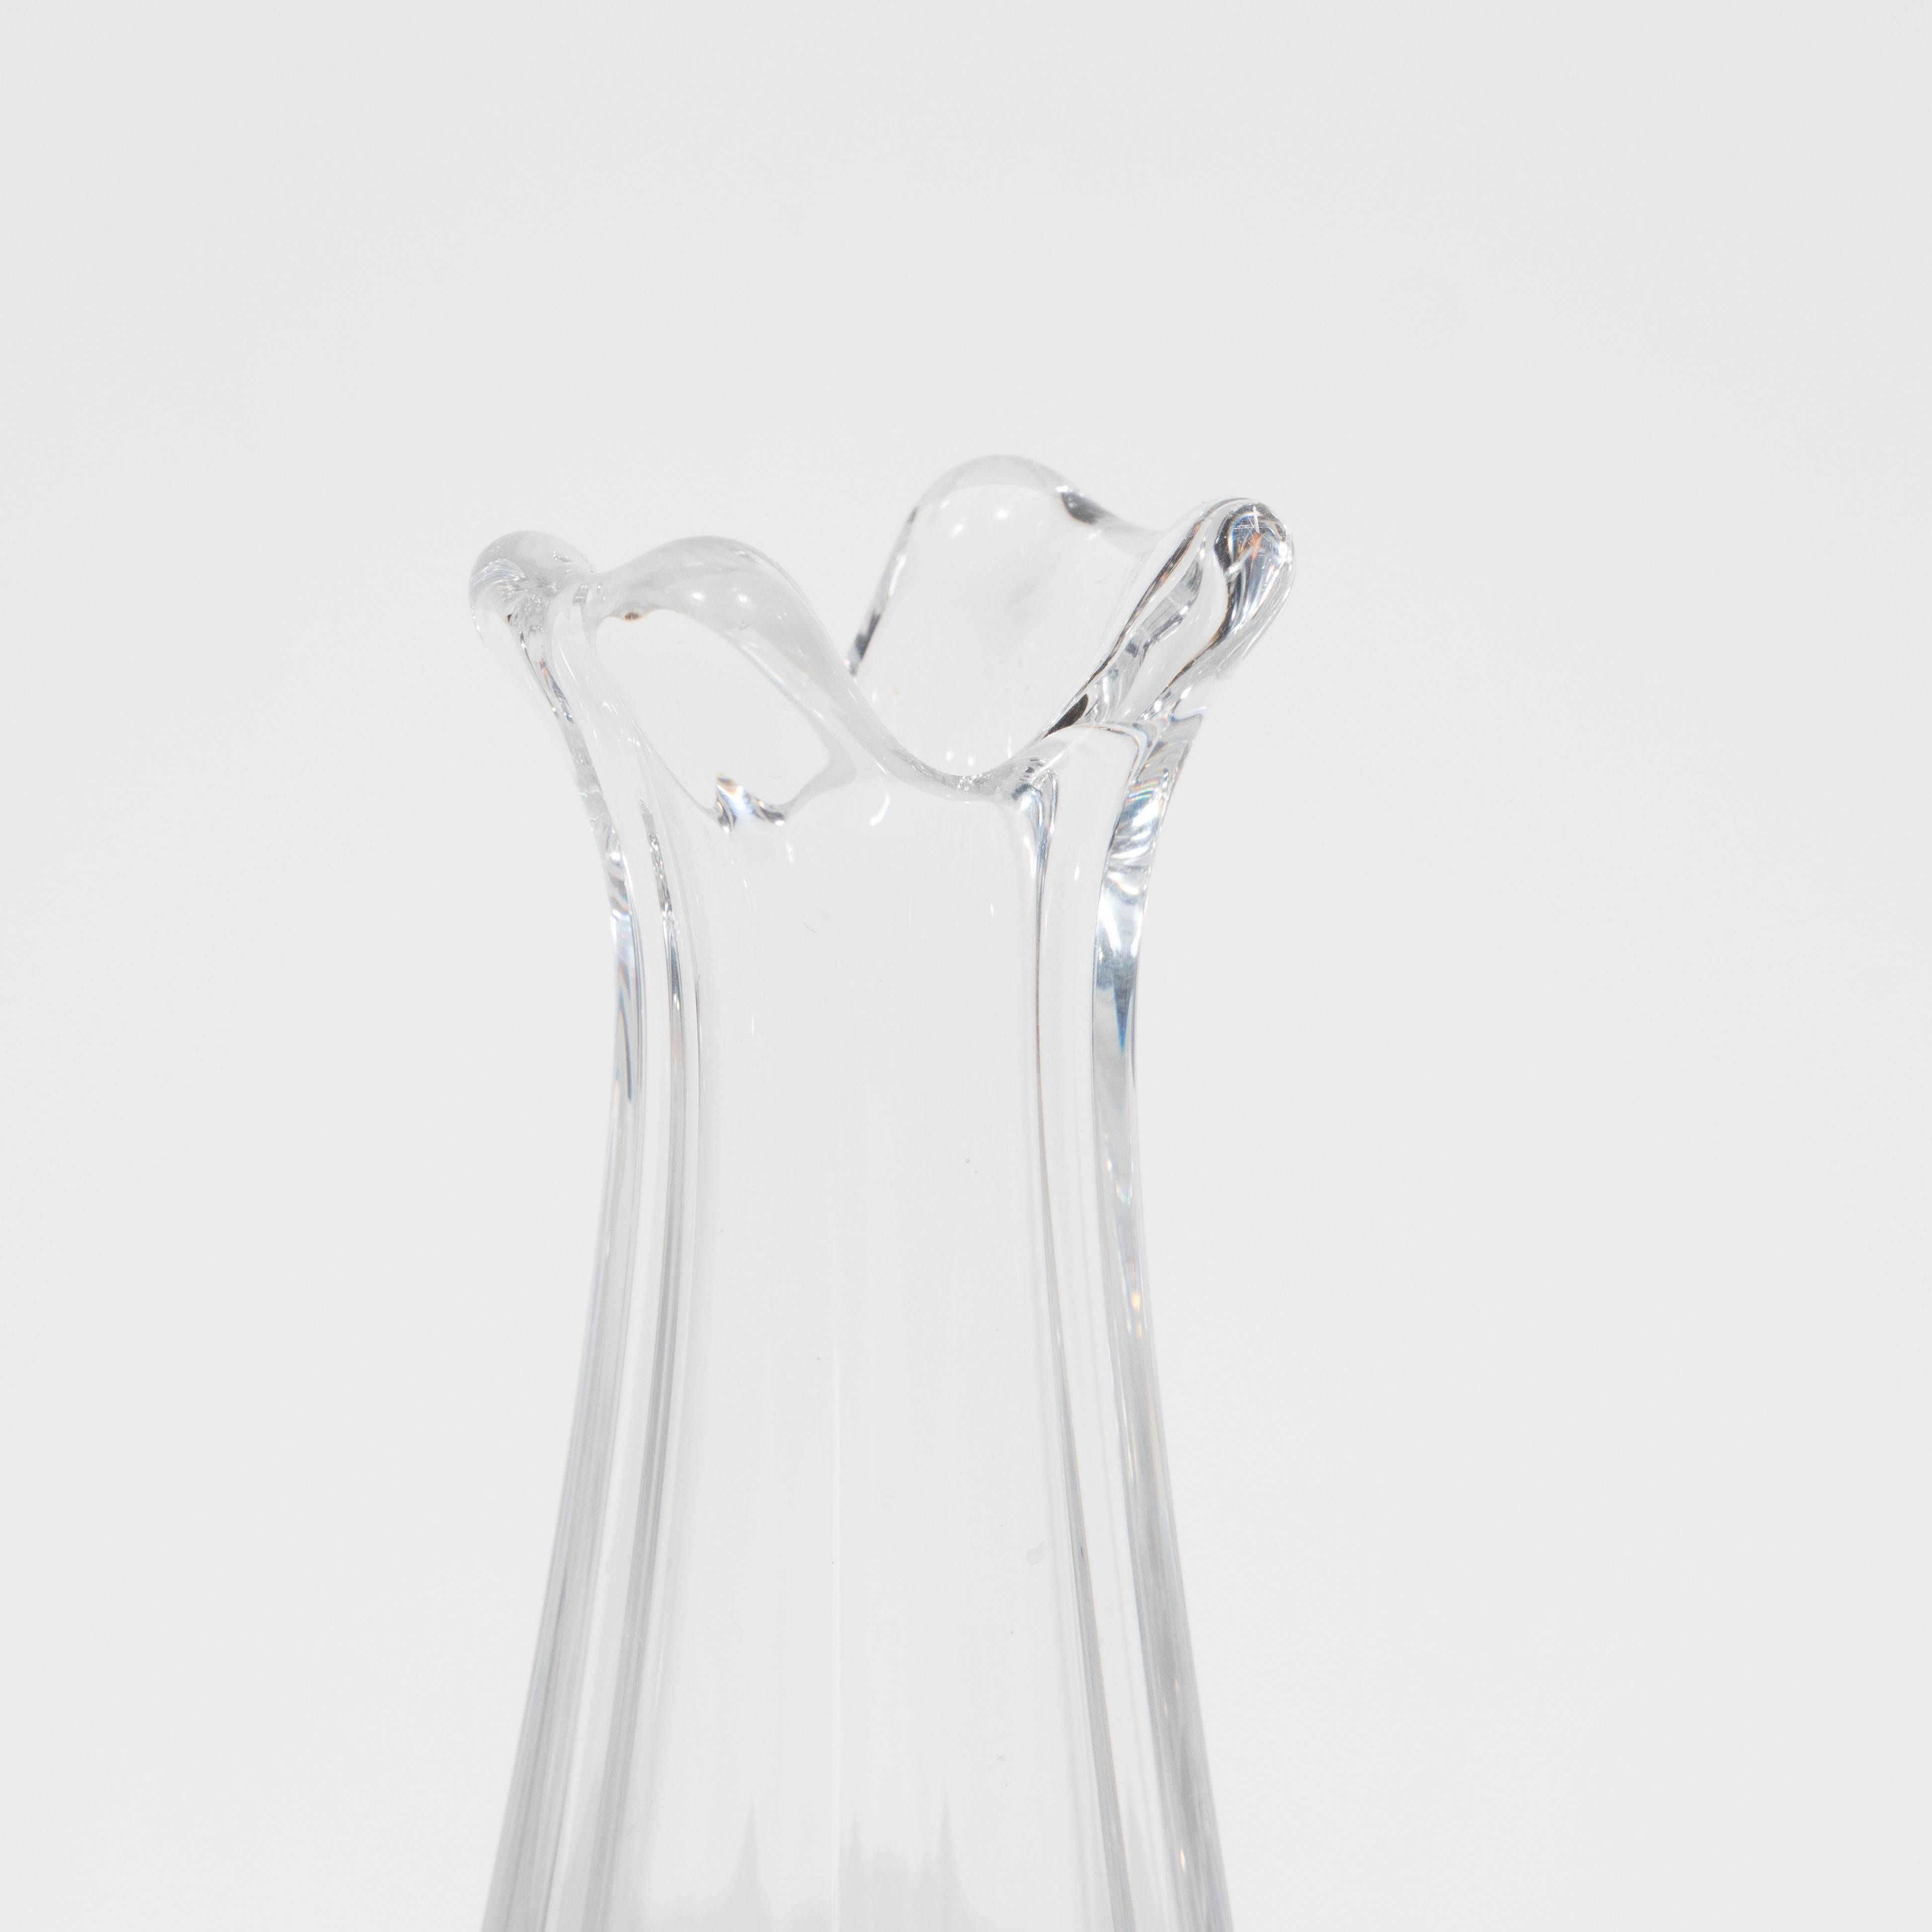 French Mid-Century Modern Translucent Sinuous Glass Vase by Daum France 1